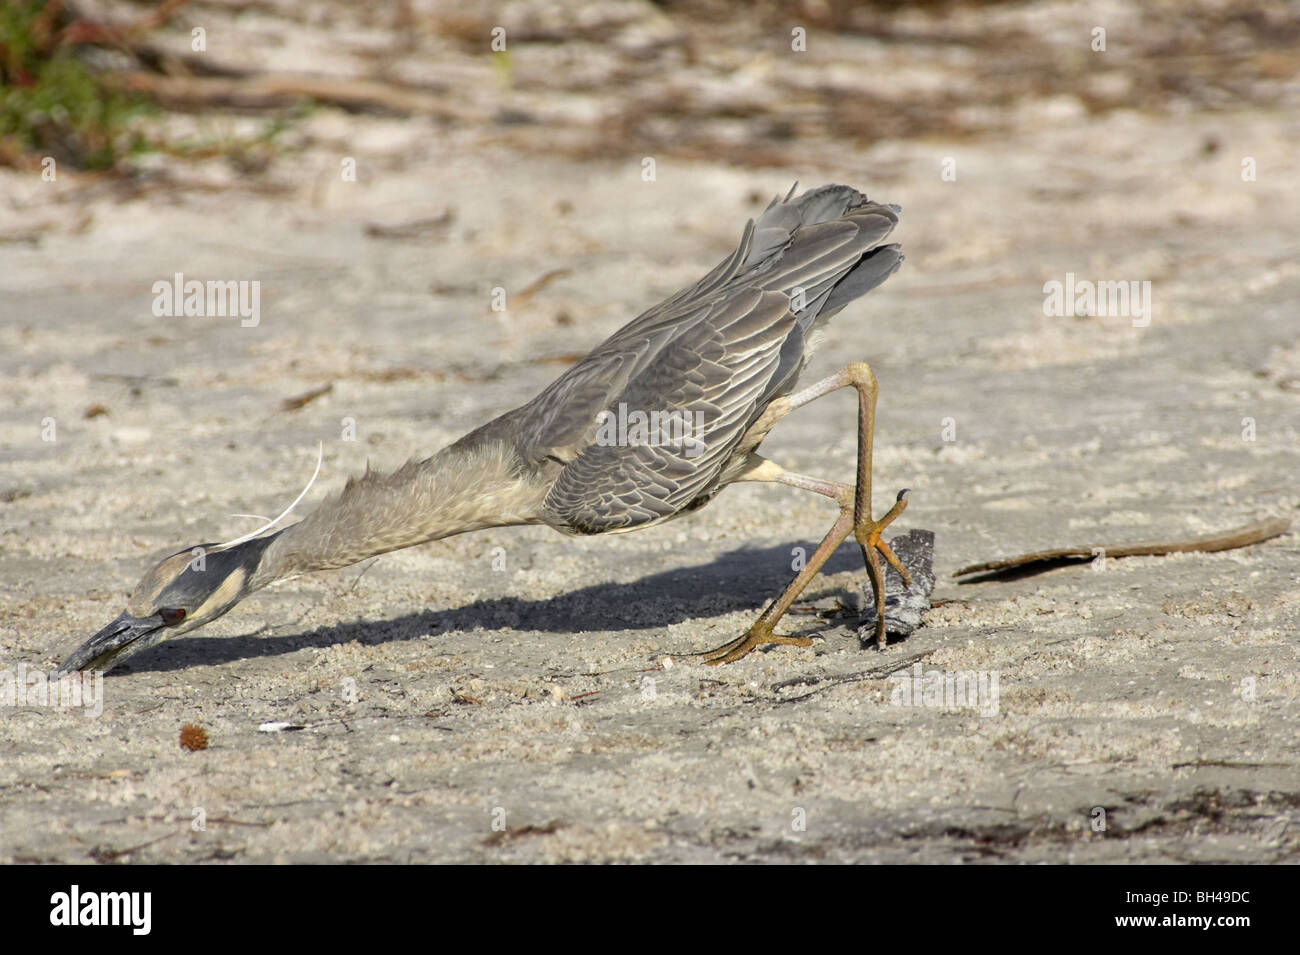 Juvenile yellow-crowned night heron (Nycticorax violacea) catching crab on beach at Fort de Soto. Stock Photo